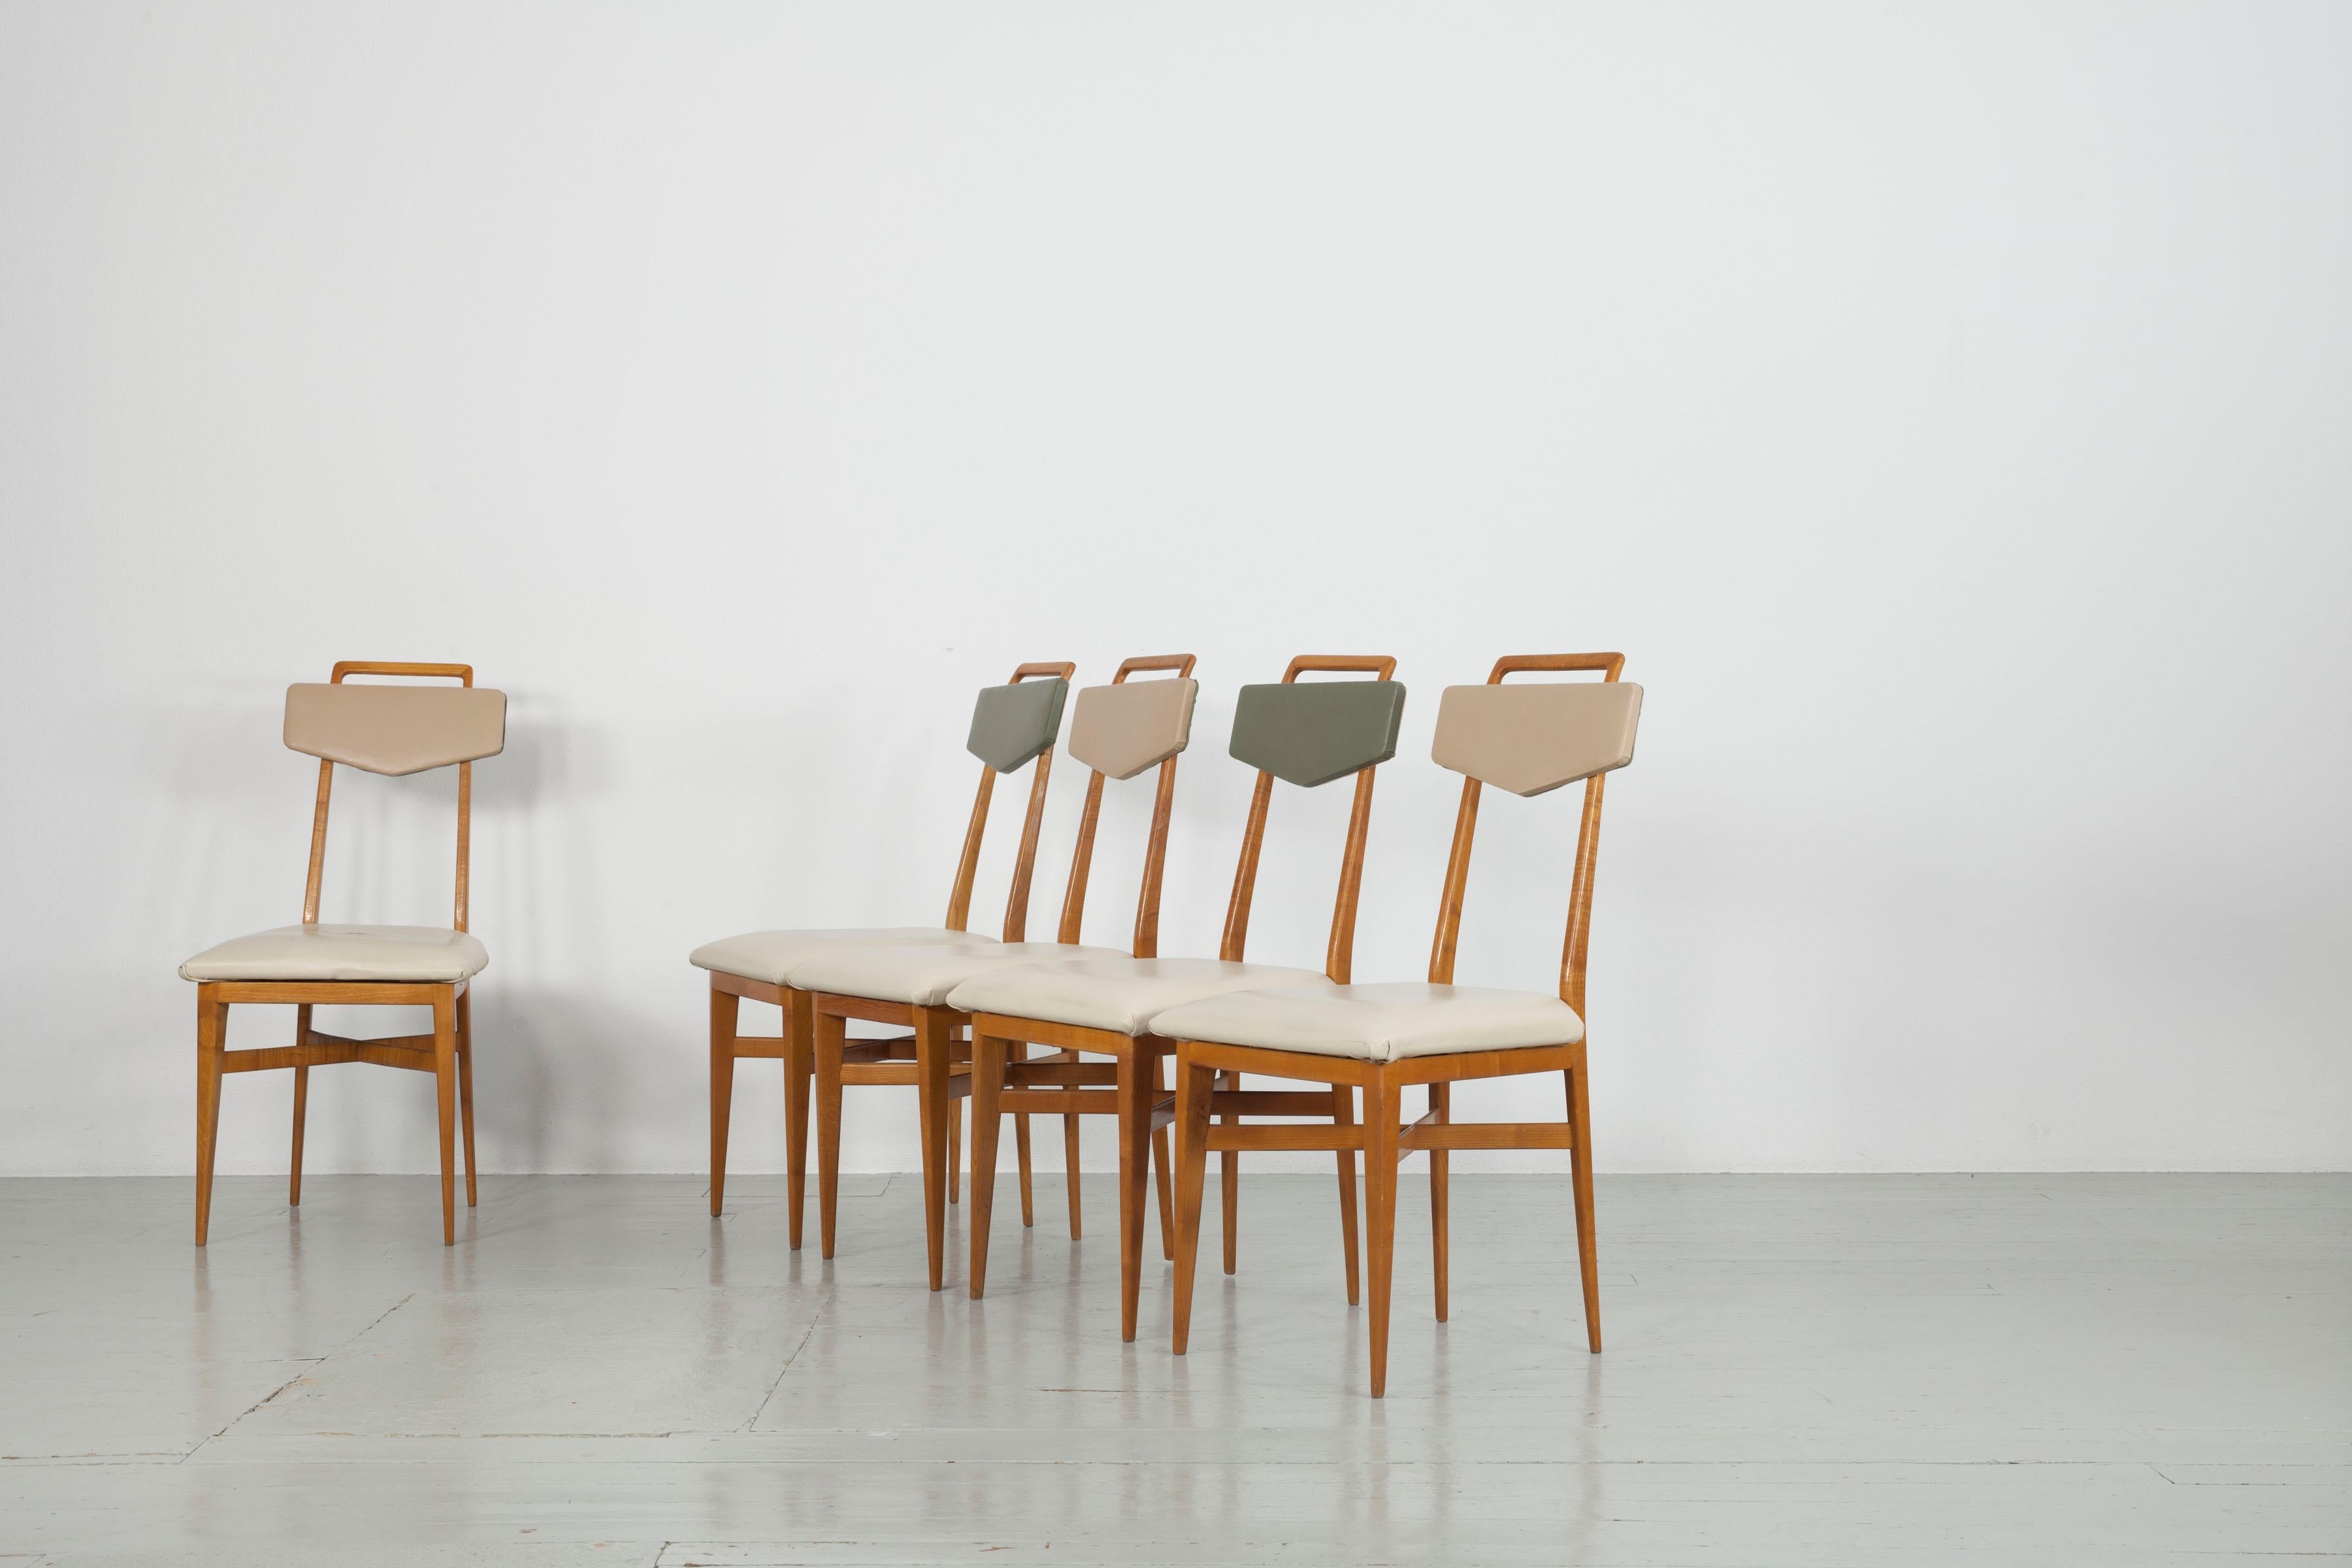 Set of 6 Scuola Torinese Chairs, Italy, 1950s For Sale 3